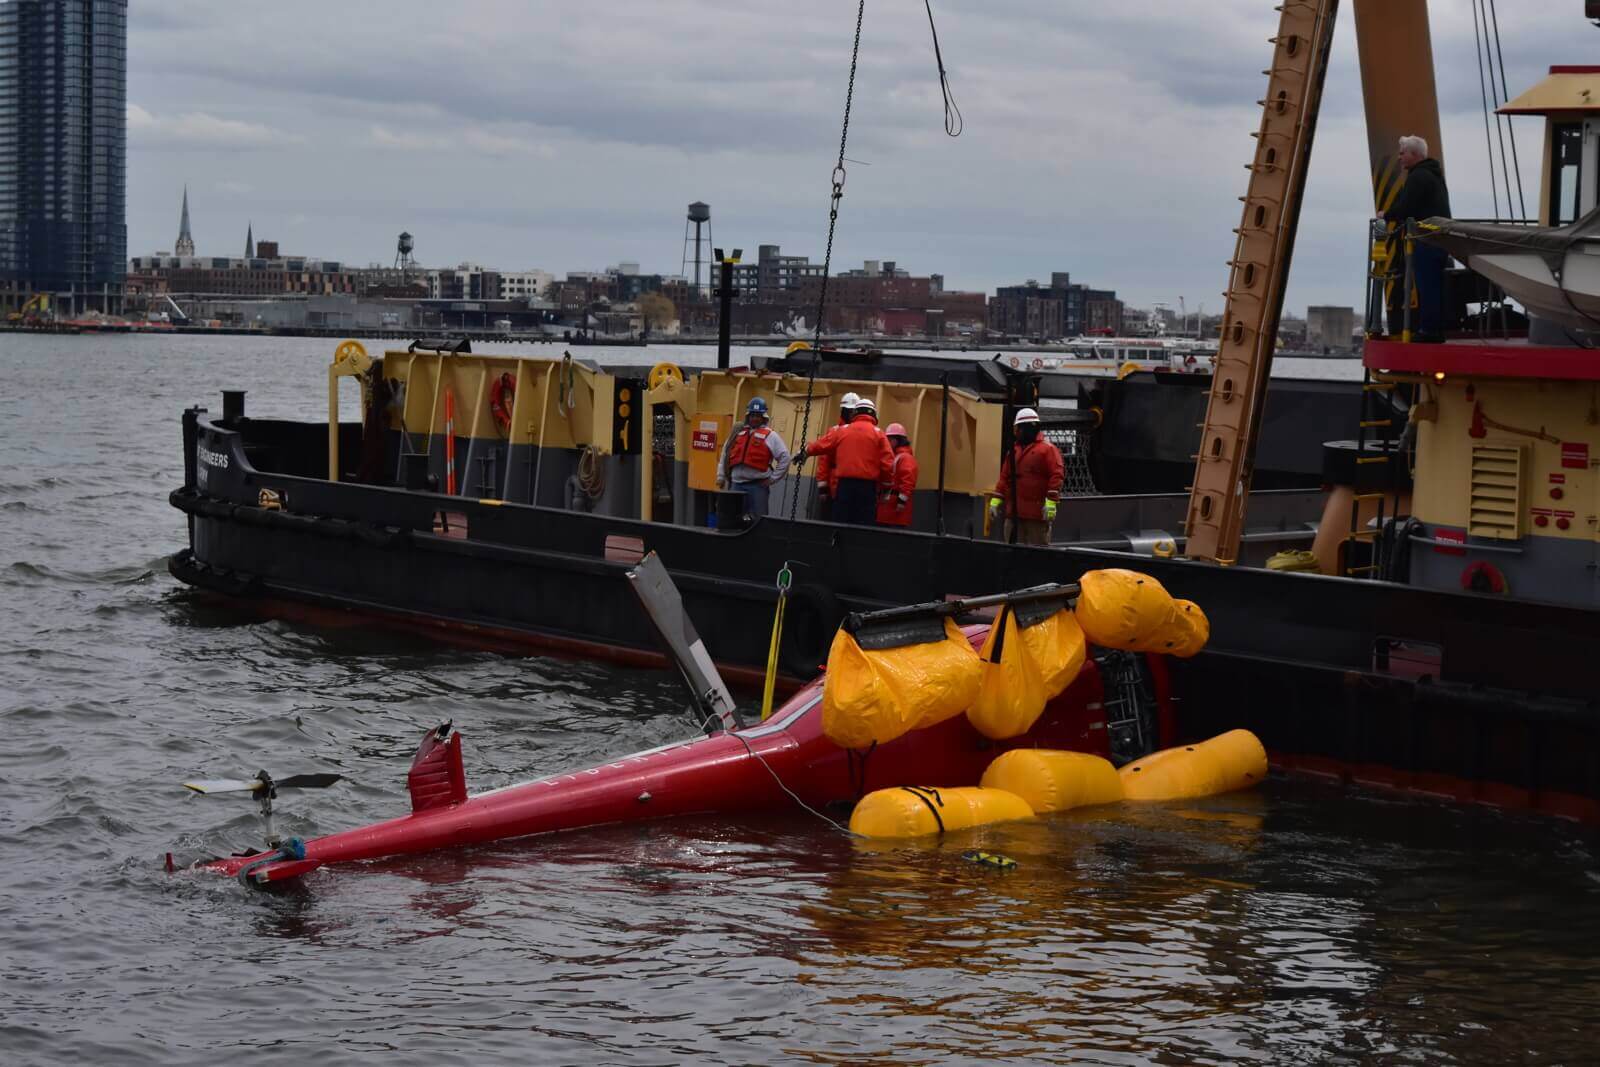 The accident helicopter was recovered from the East River on March 12. NTSB Photo